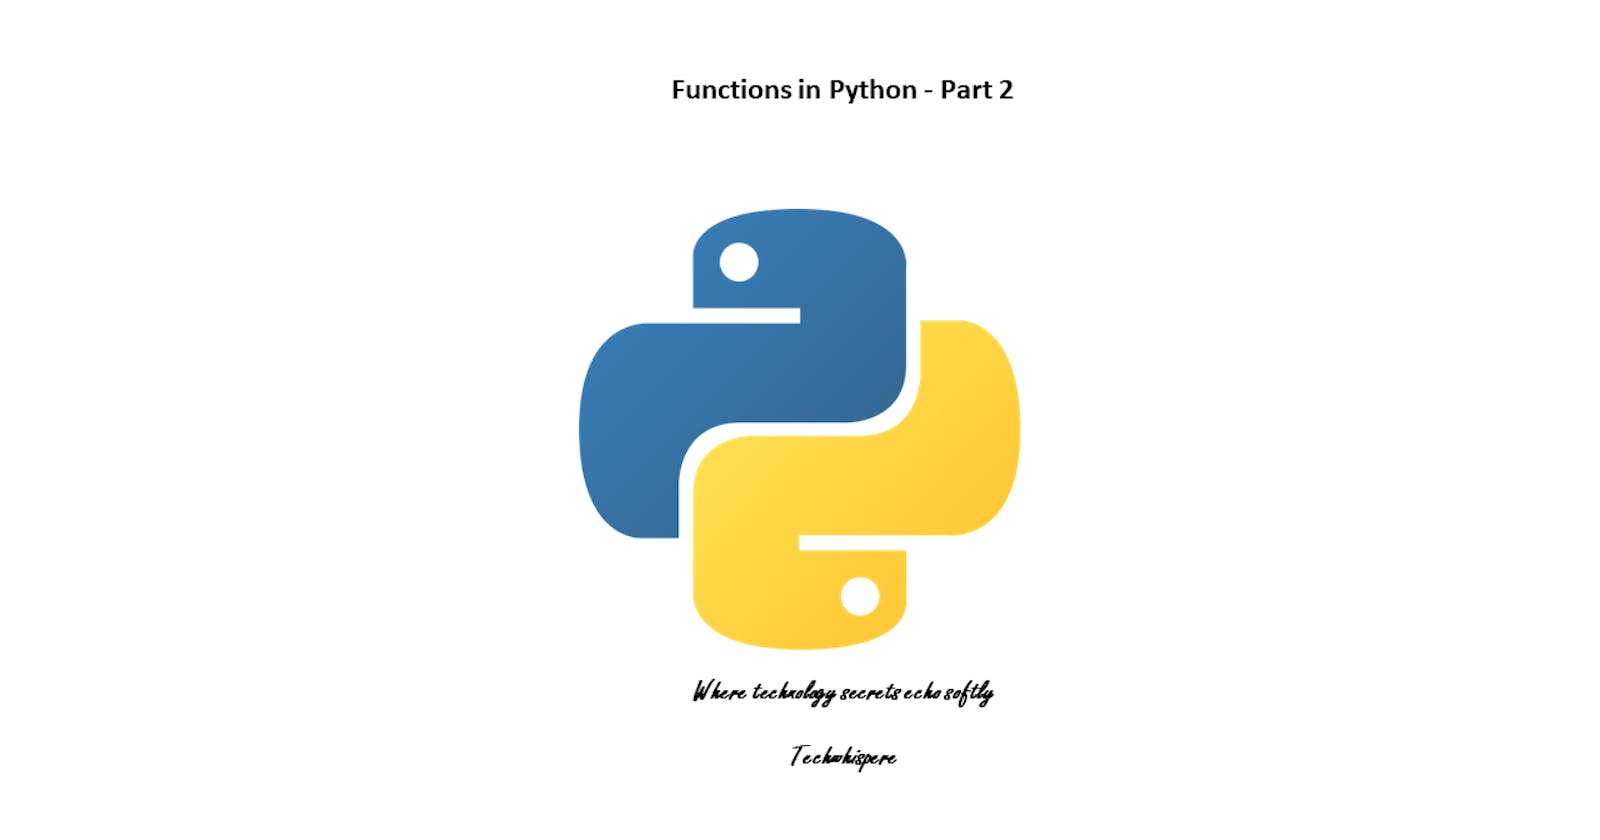 Functions in Python  - Part 3